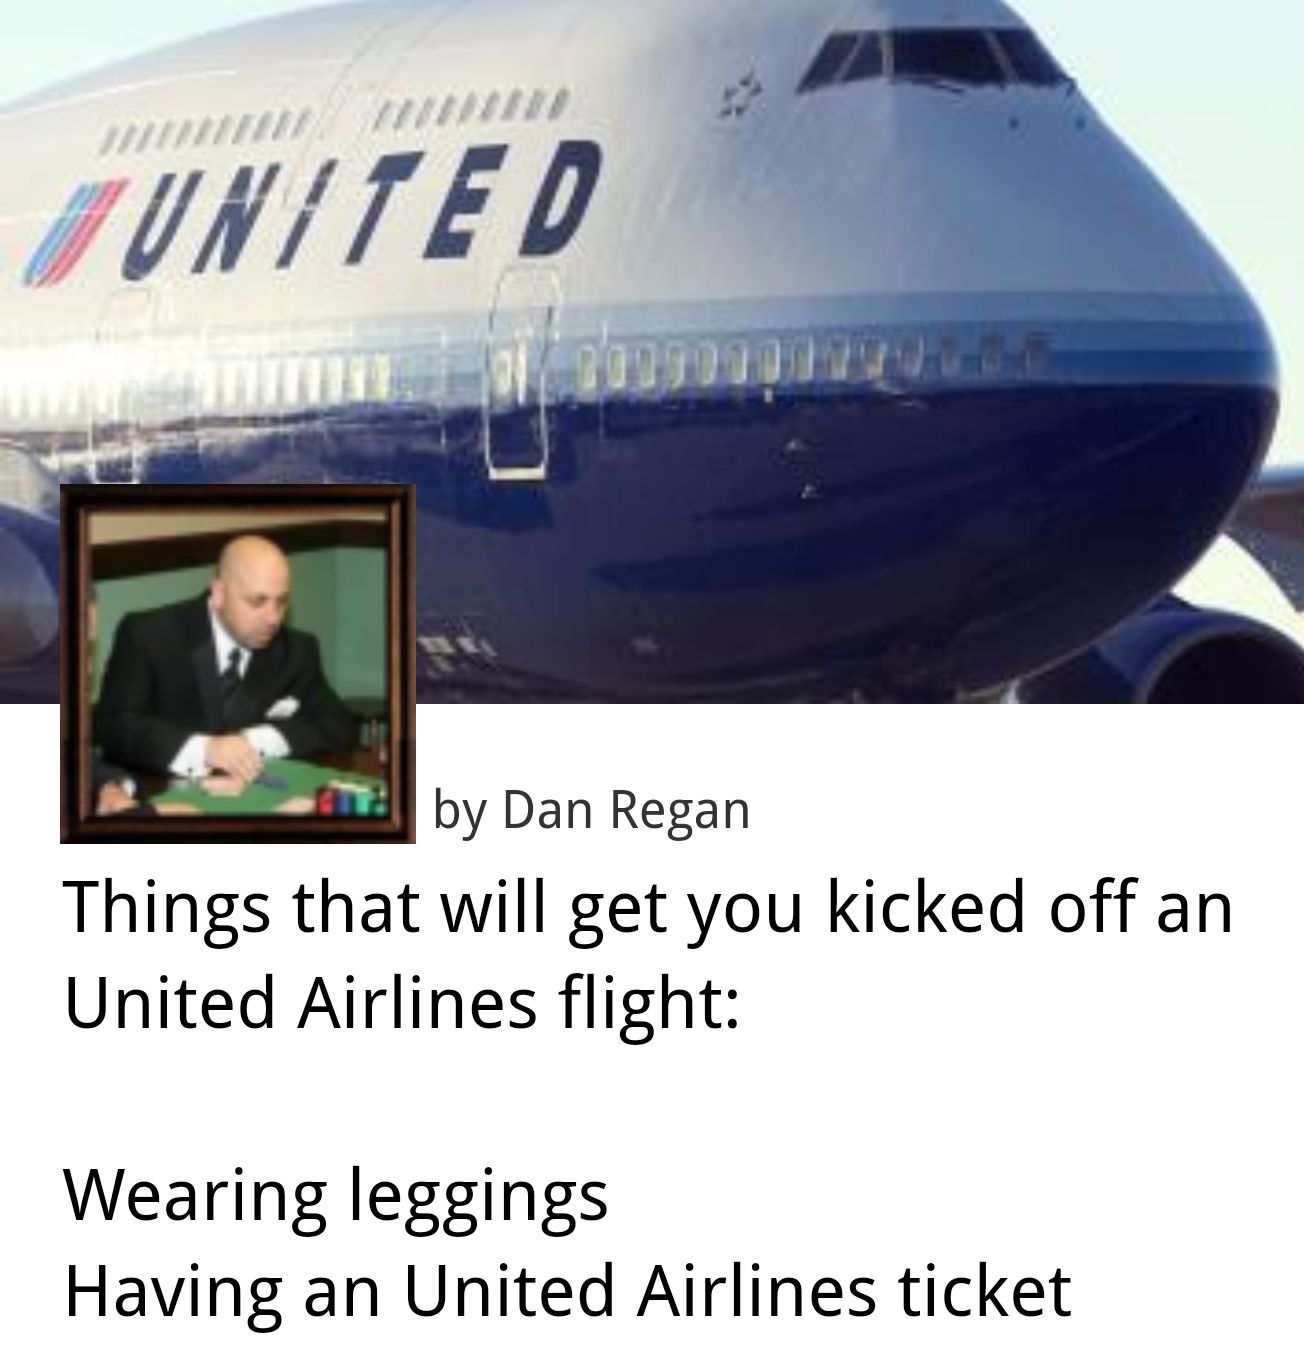 Things that will get you kicked off an United Airlines flight